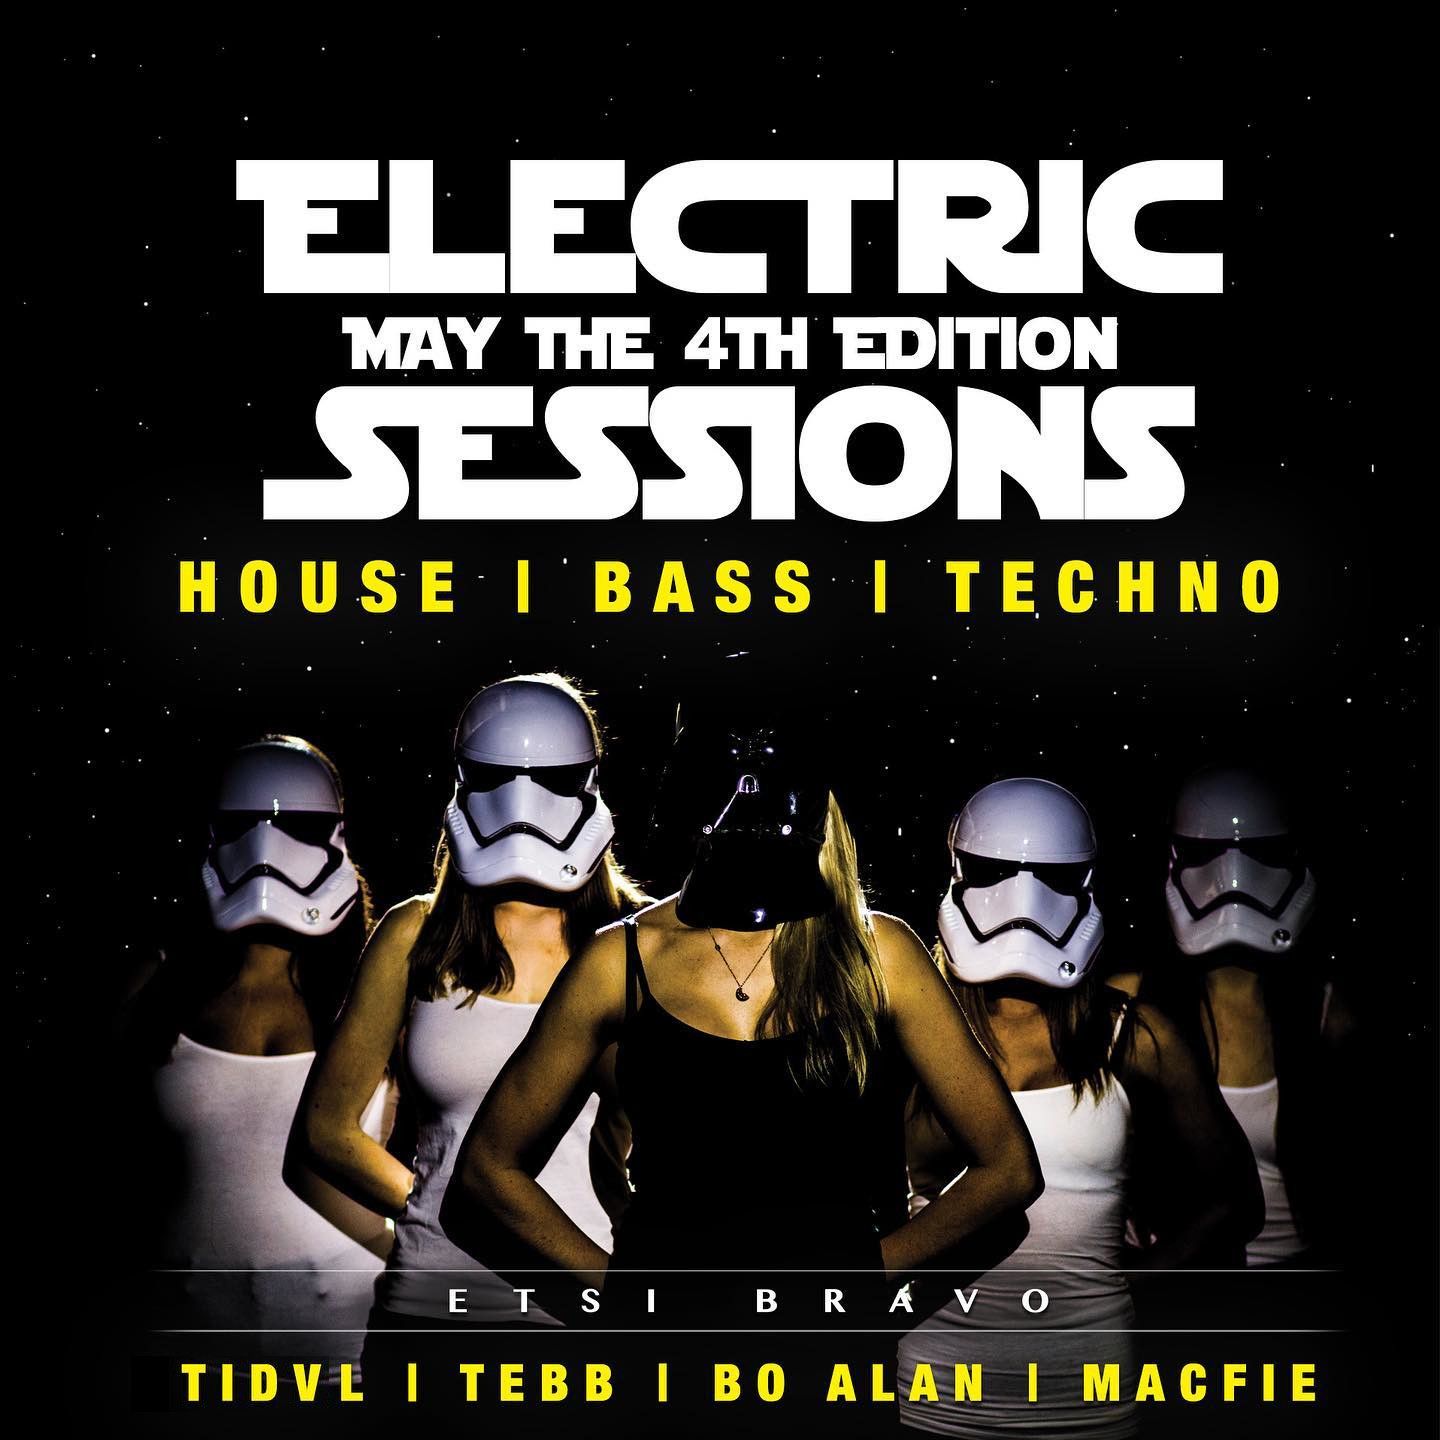 electric sessions flyer